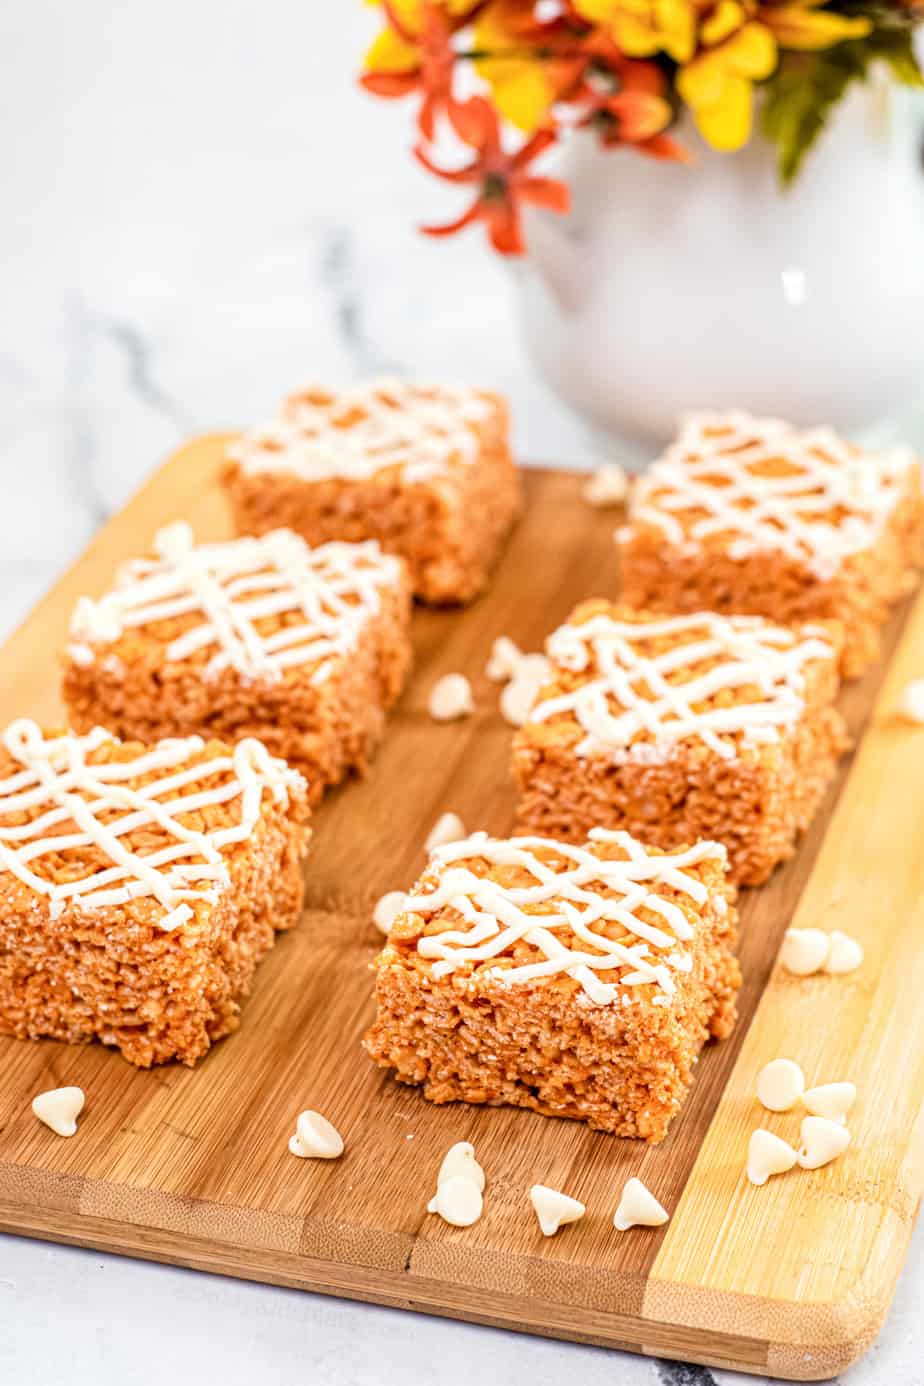 Pumpkin rice krispie treats sliced into squares on a cutting board with a white chocolate drizzle on top and white chocolate chips scattered on the cutting board.